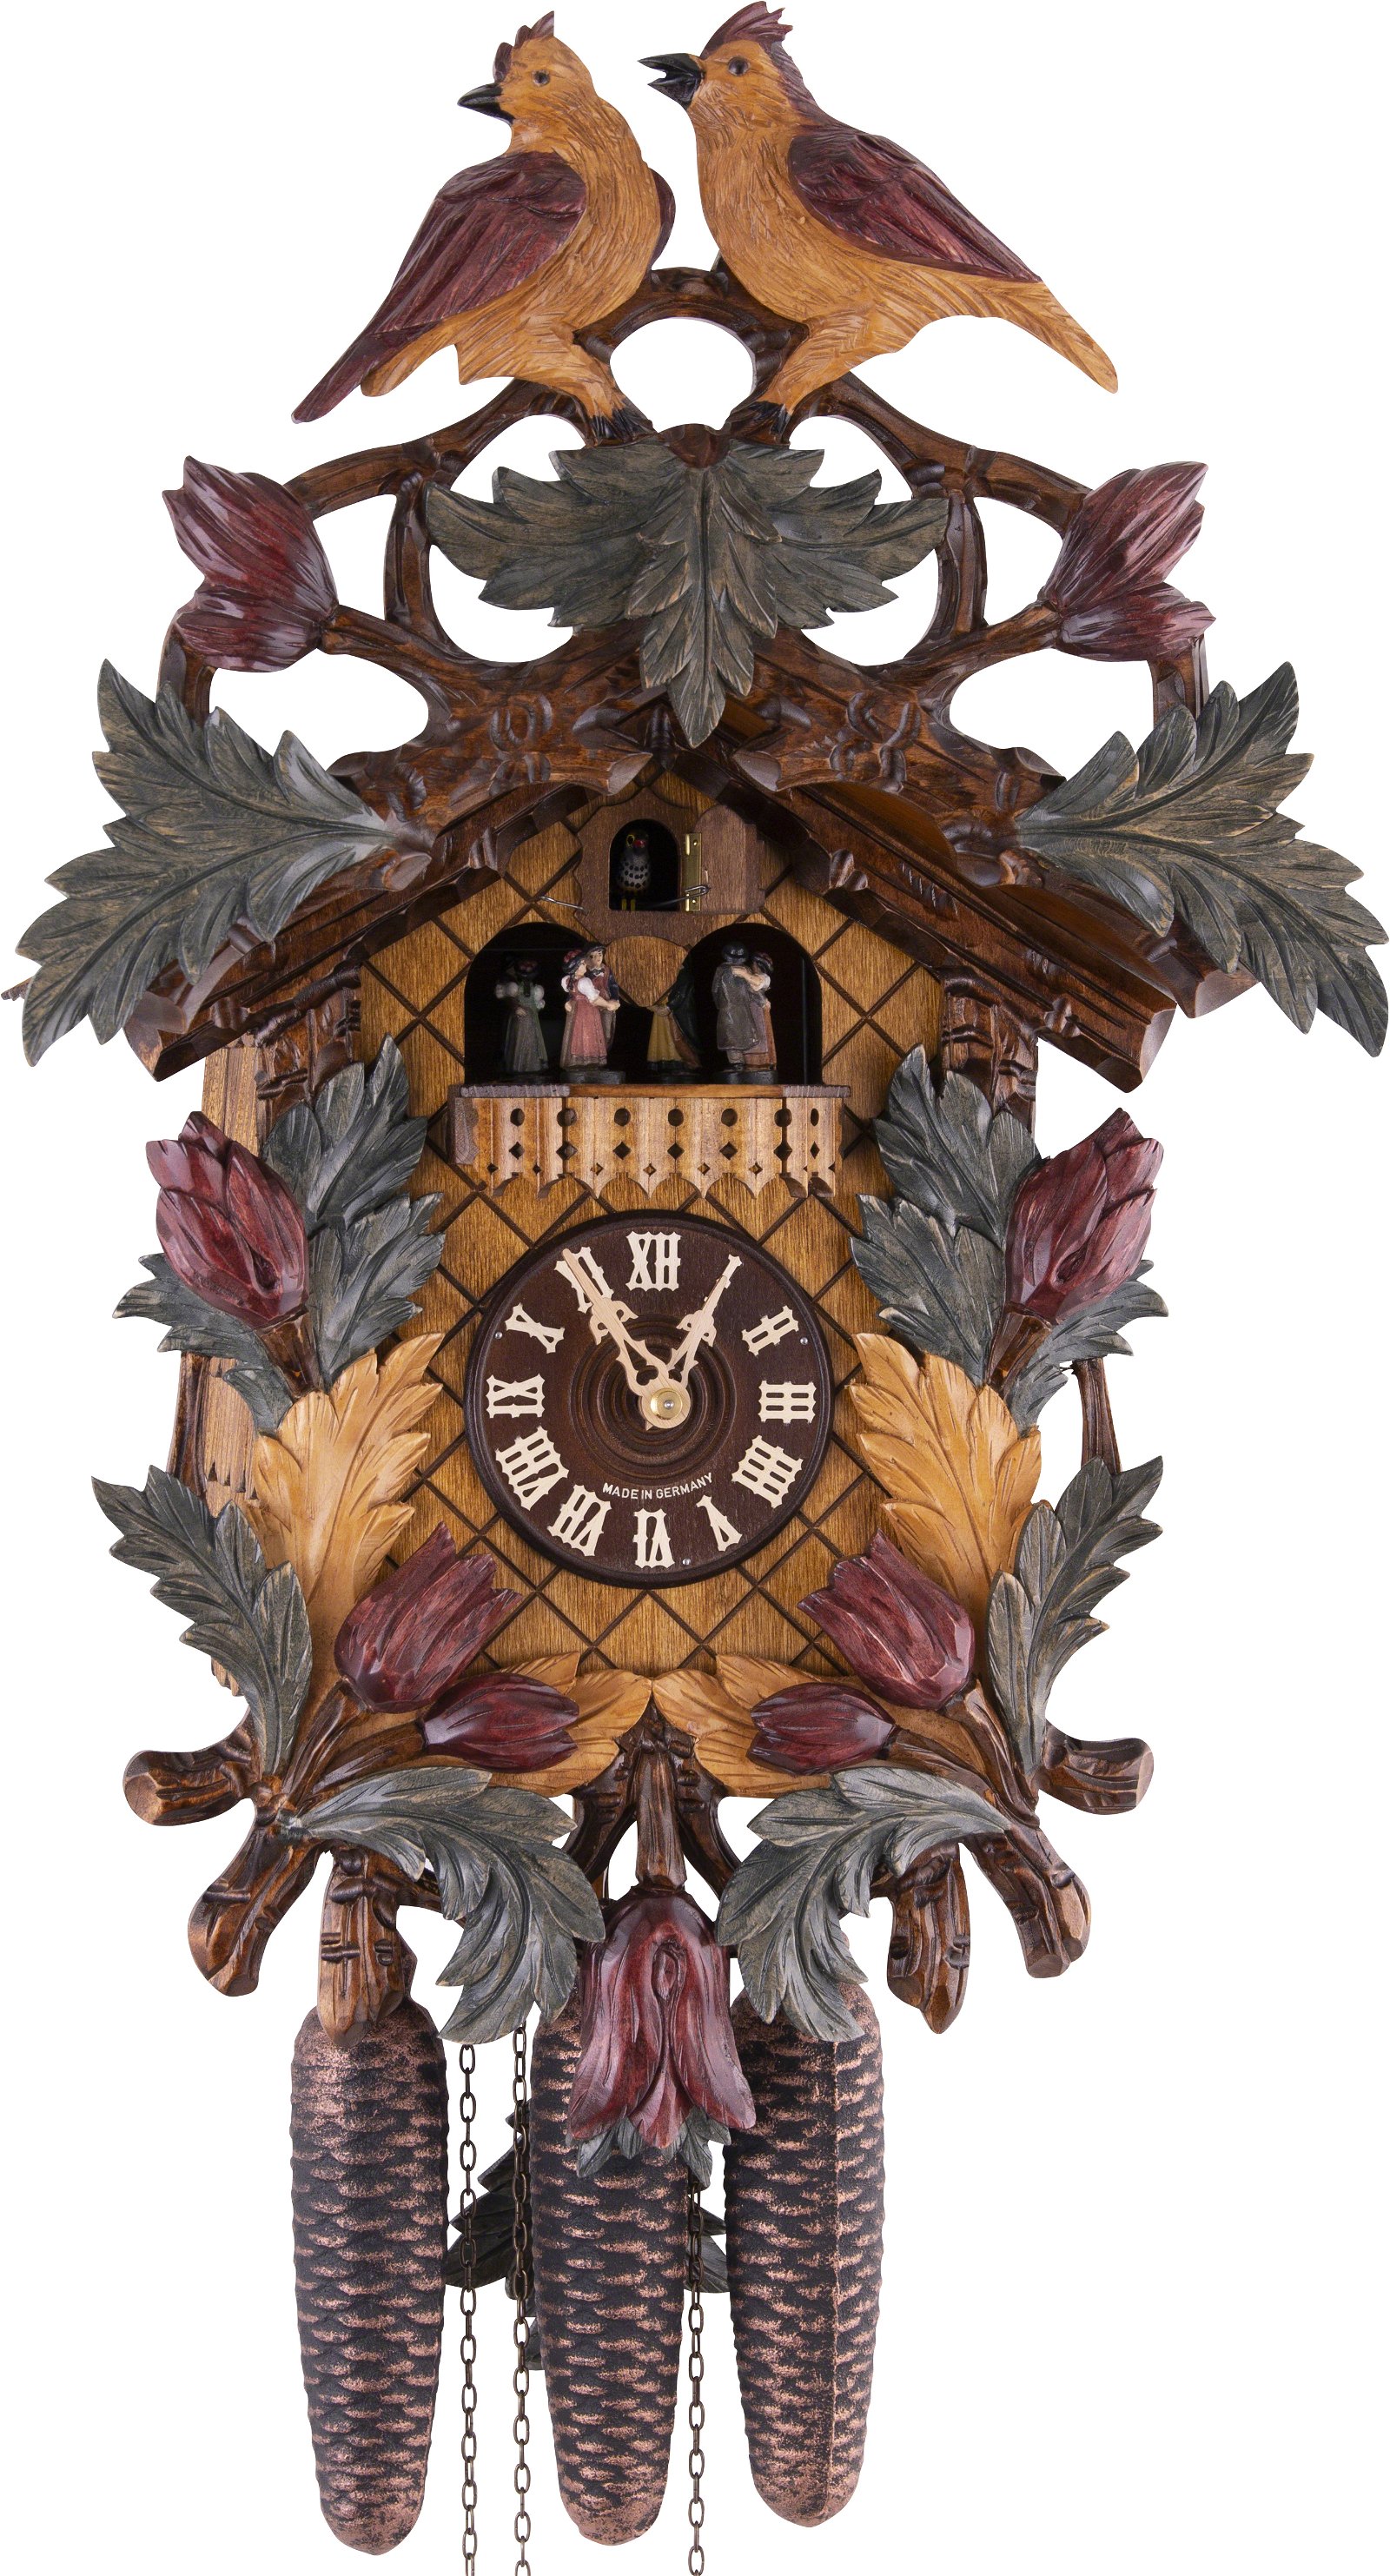 Cuckoo Clock Carved Style 8 Day Movement 57cm by August Schwer